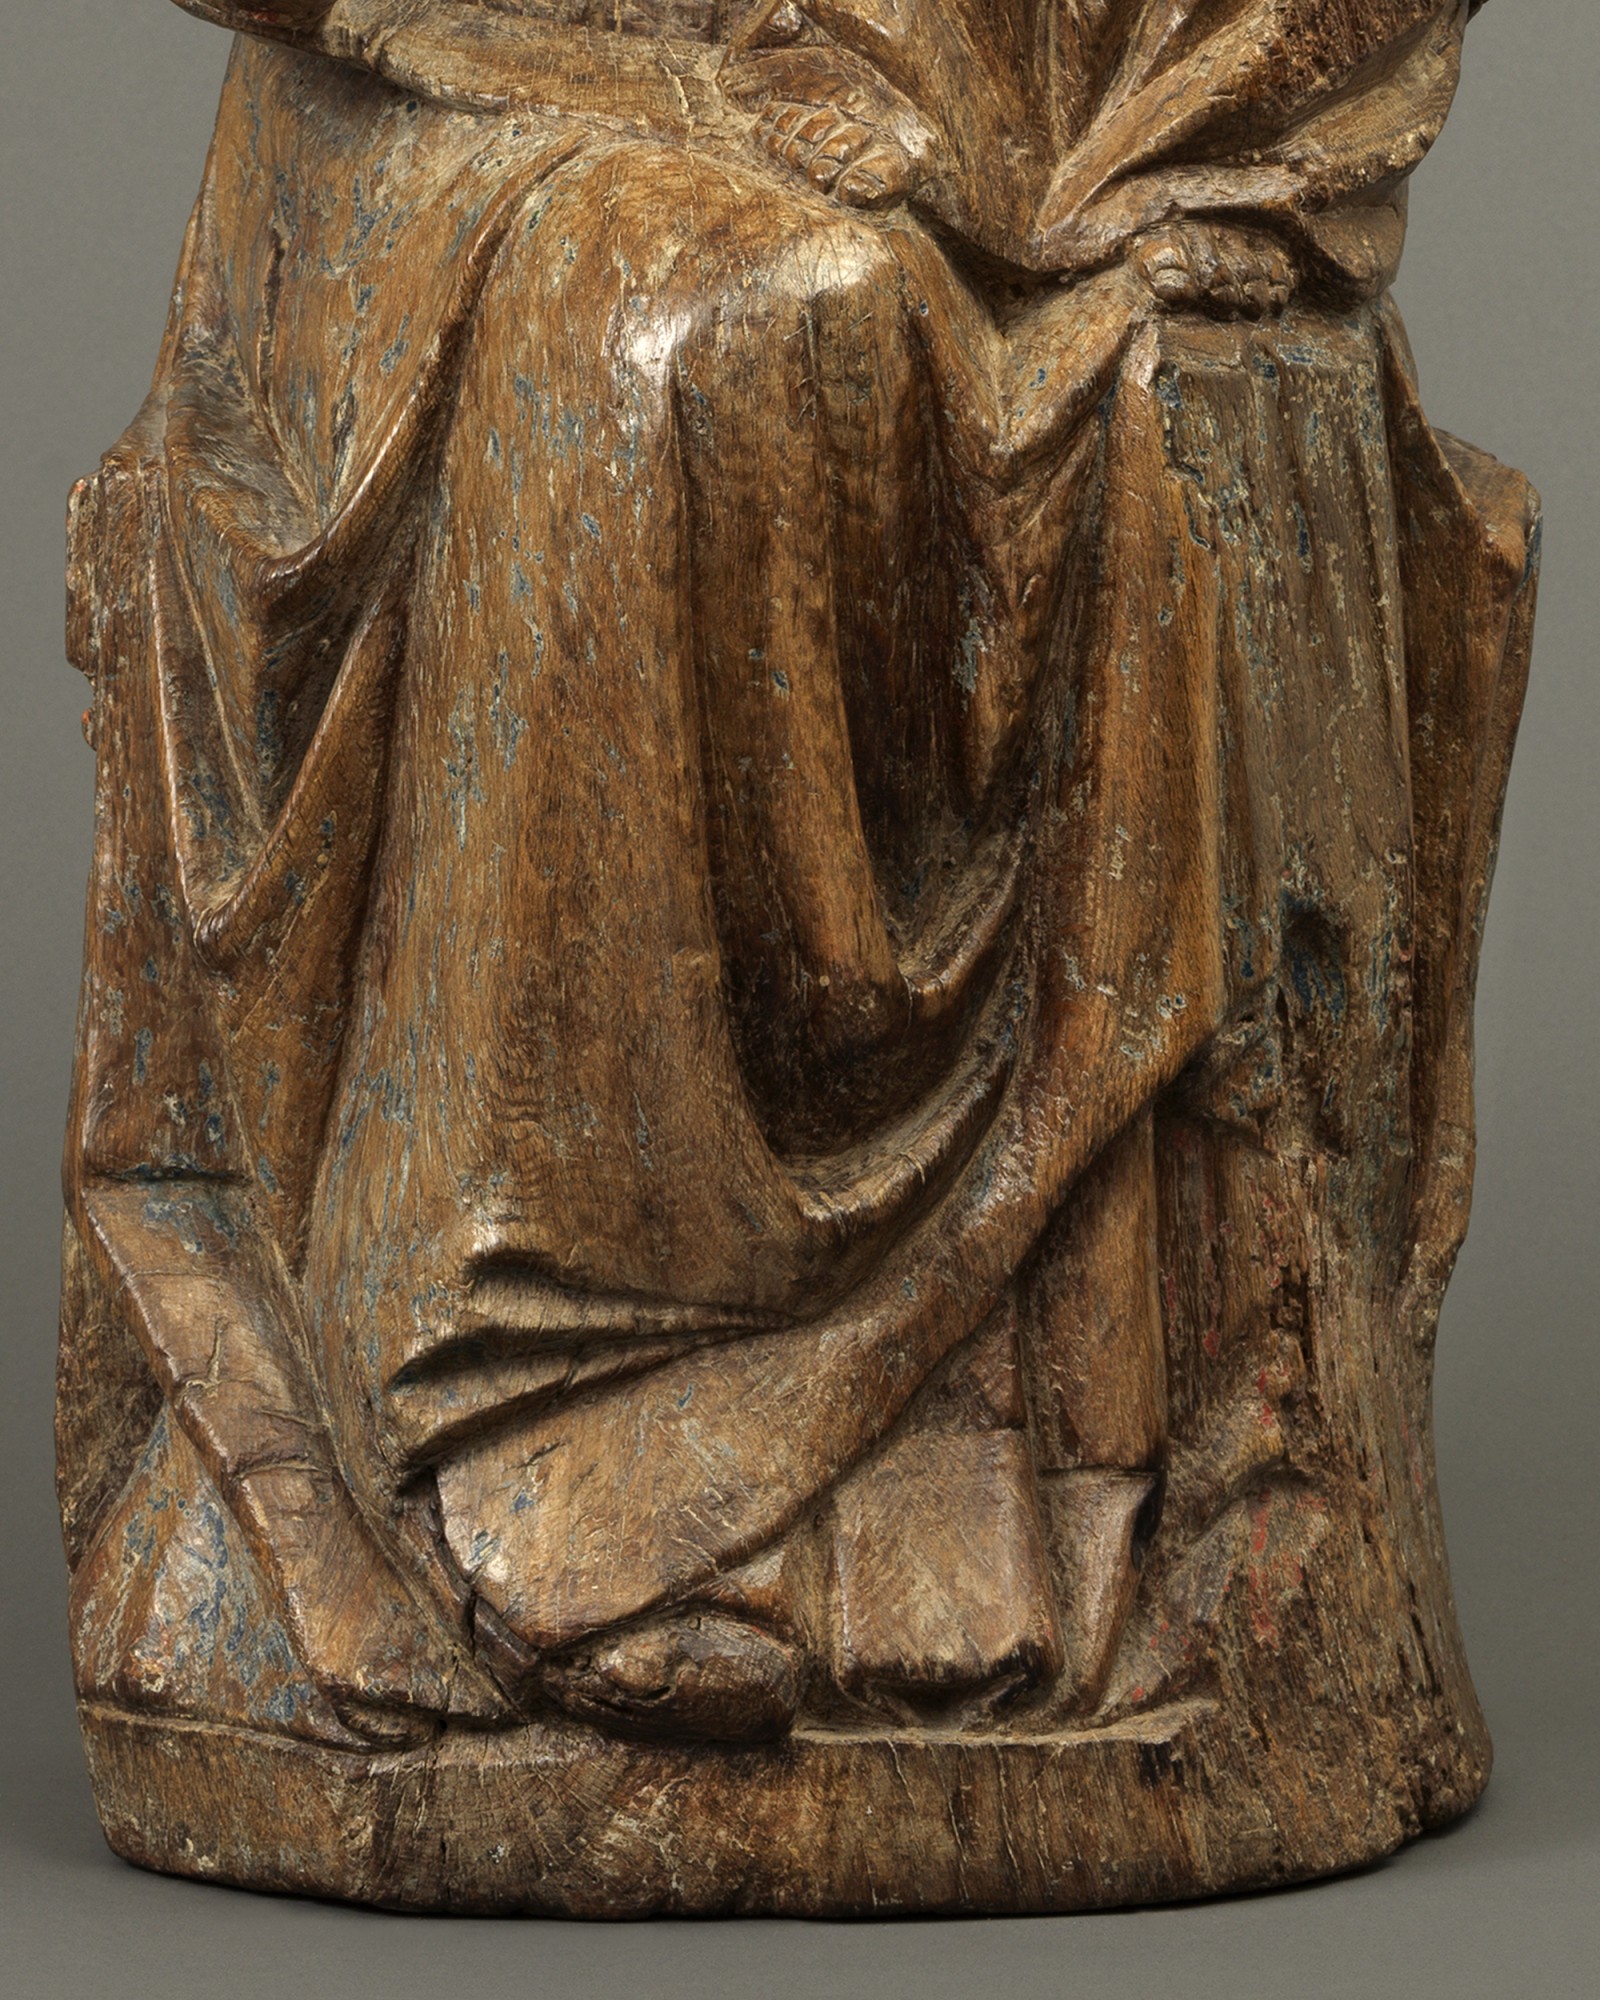 Sedes SapientiaeEnthroned Virgin and Child, Northern France, c. 1300